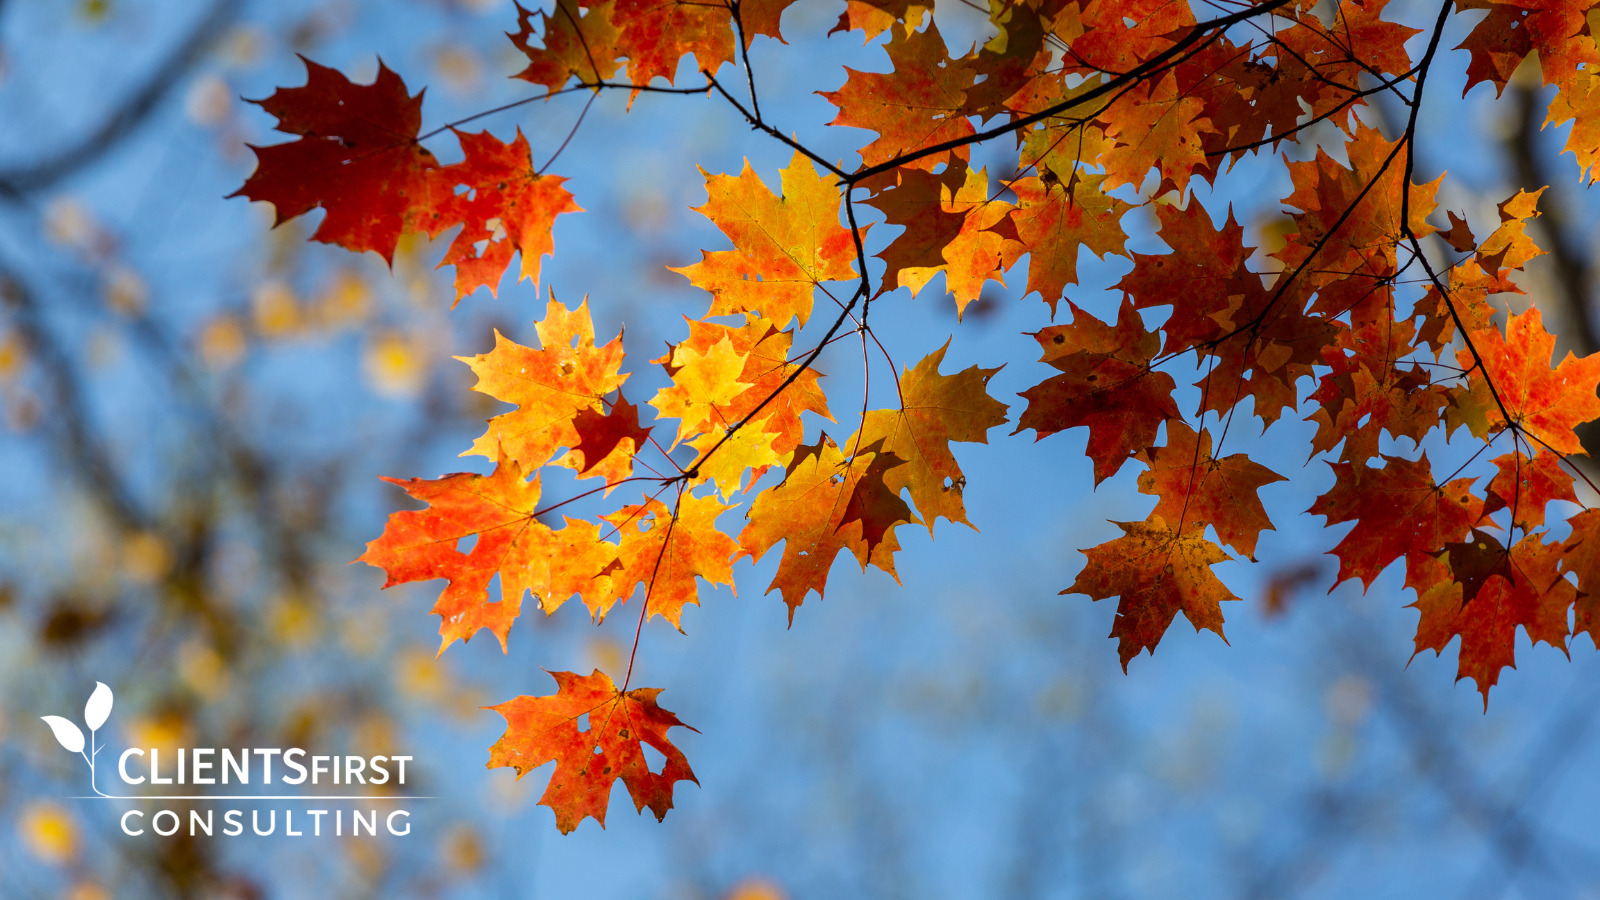 How To Refocus On CRM And Data Quality In Your Marketing Efforts This Fall